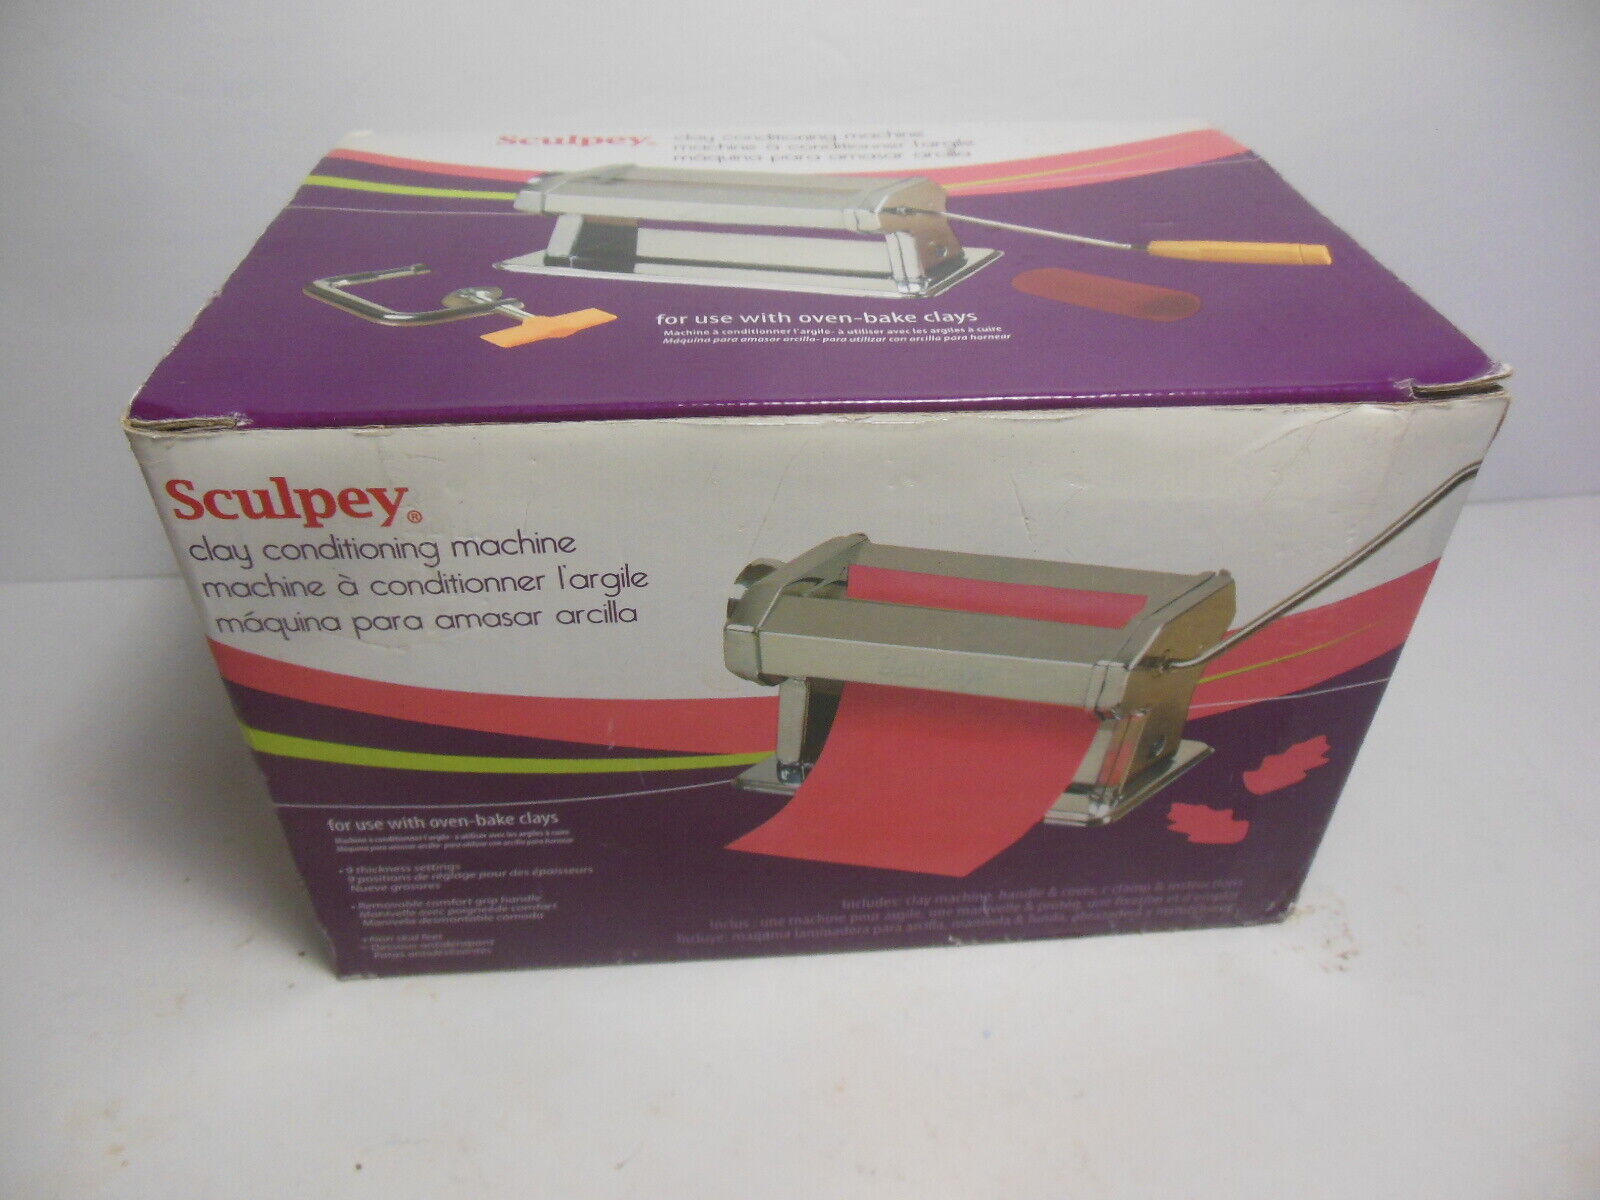 Sculpey Clay Conditioning Machine For Oven-Bake Clays